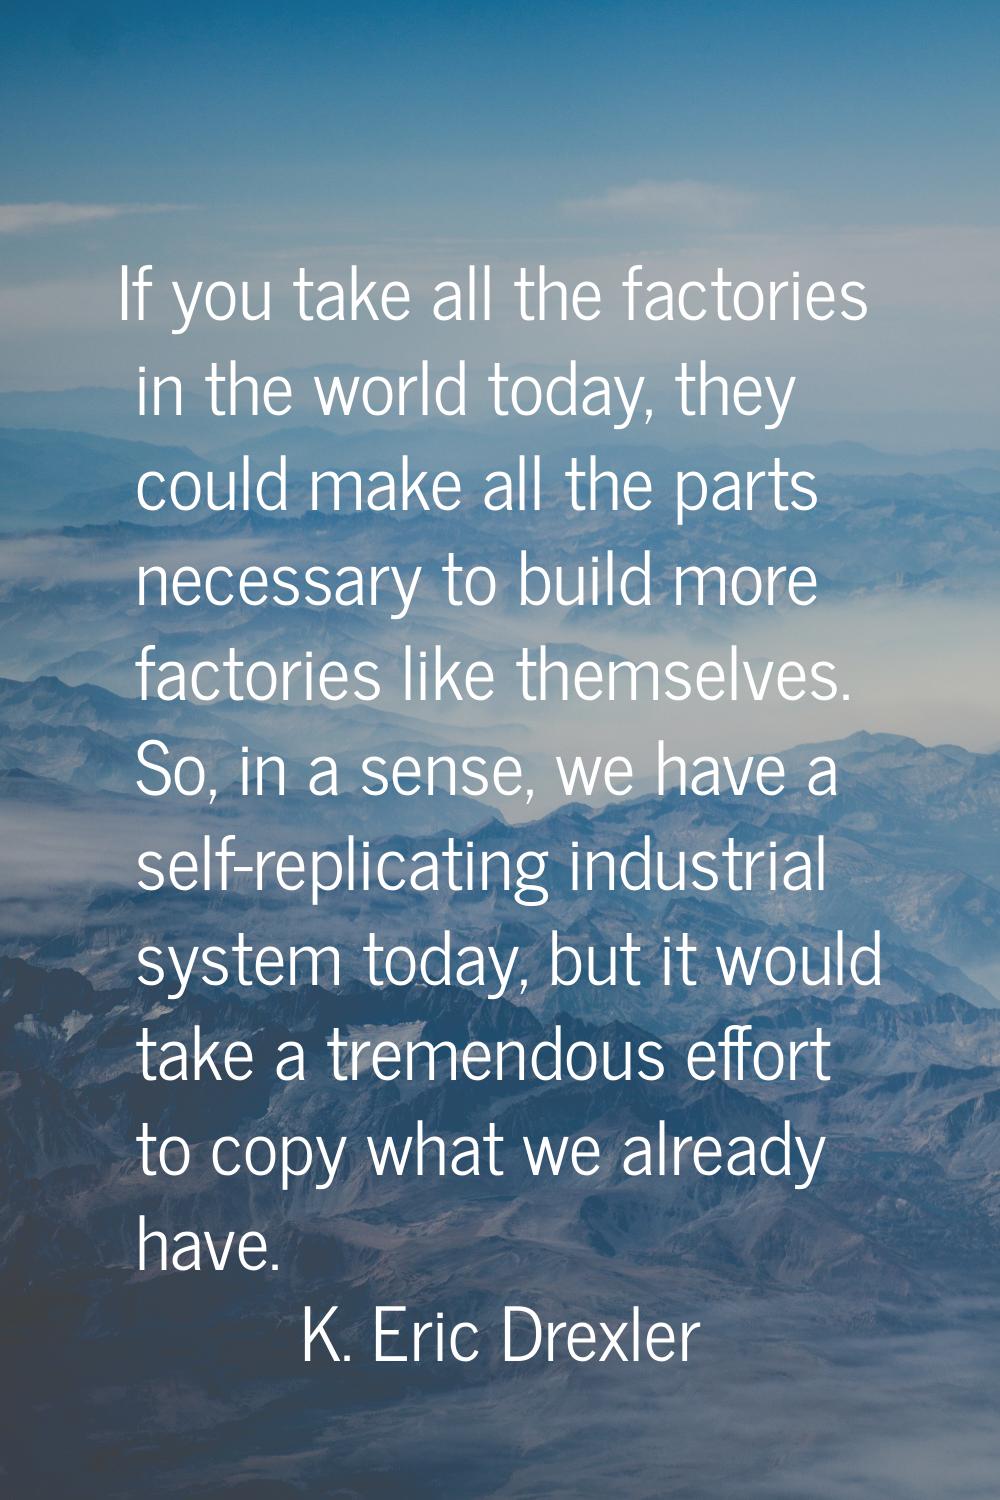 If you take all the factories in the world today, they could make all the parts necessary to build 